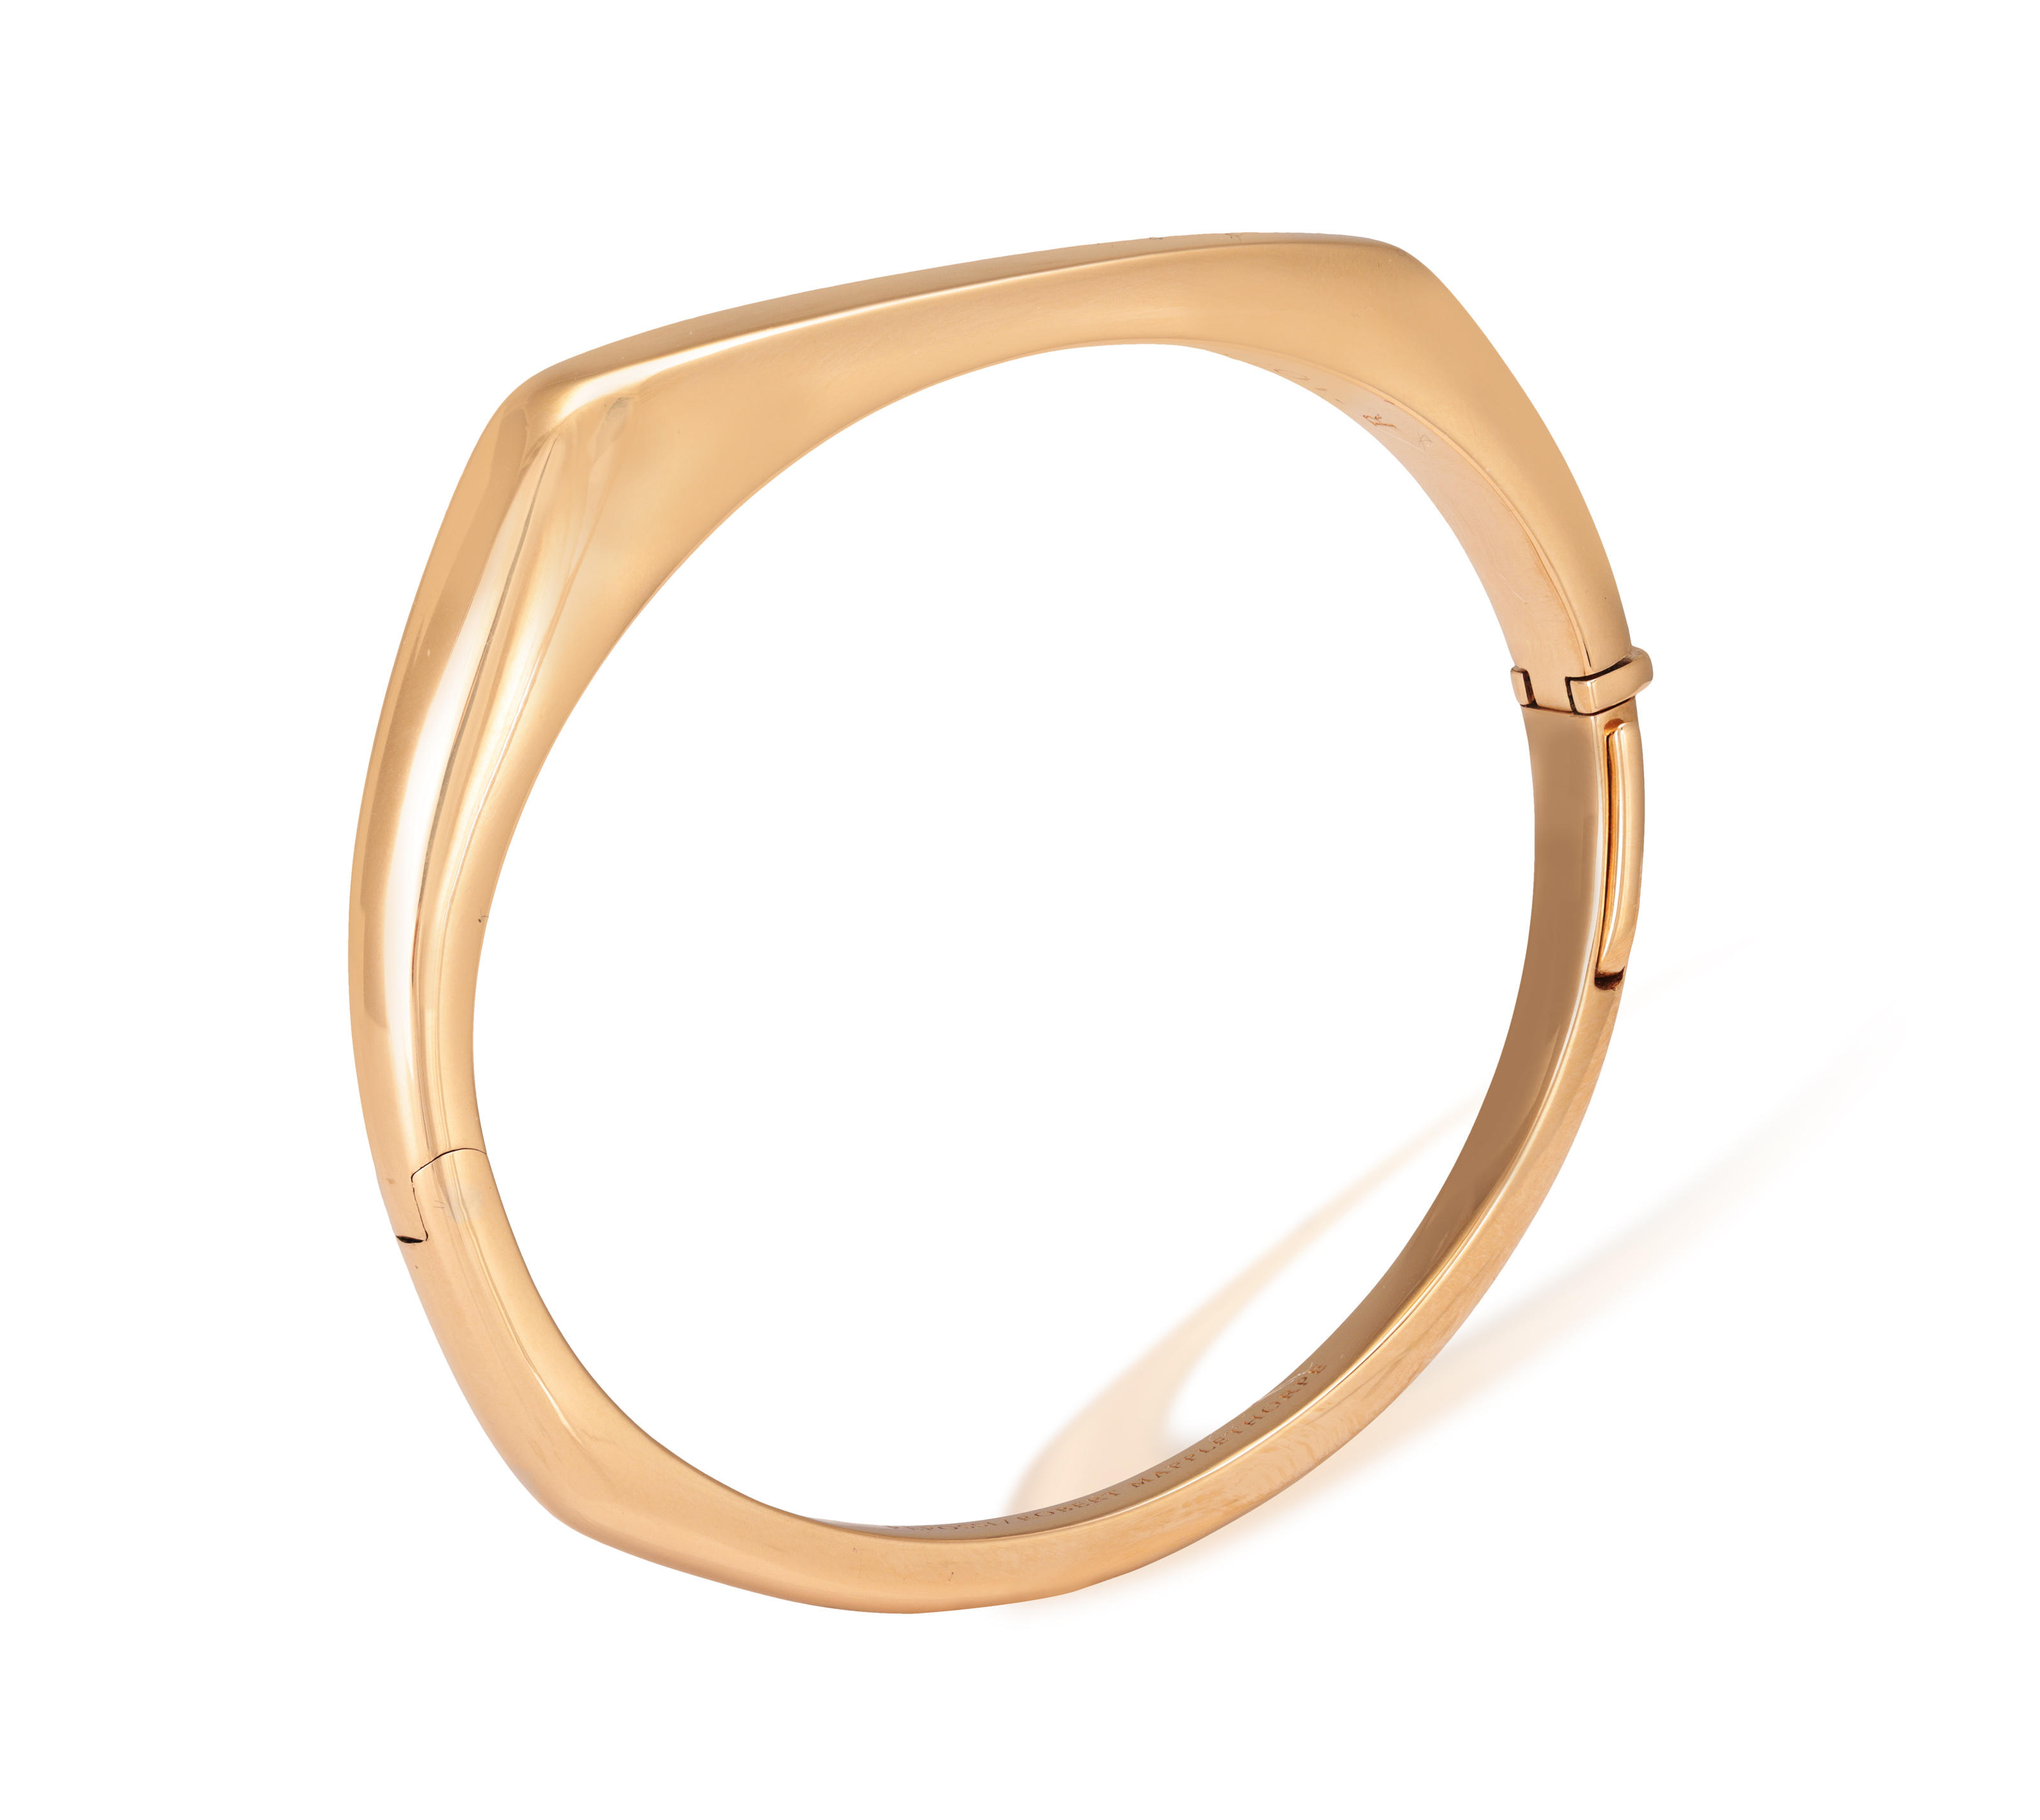 A GOLD 'ROBERT MAPPLETHORPE' BANGLE, DESIGNED BY GAIA REPOSSI, FOR REPOSSI Limited Edition, - Image 3 of 8